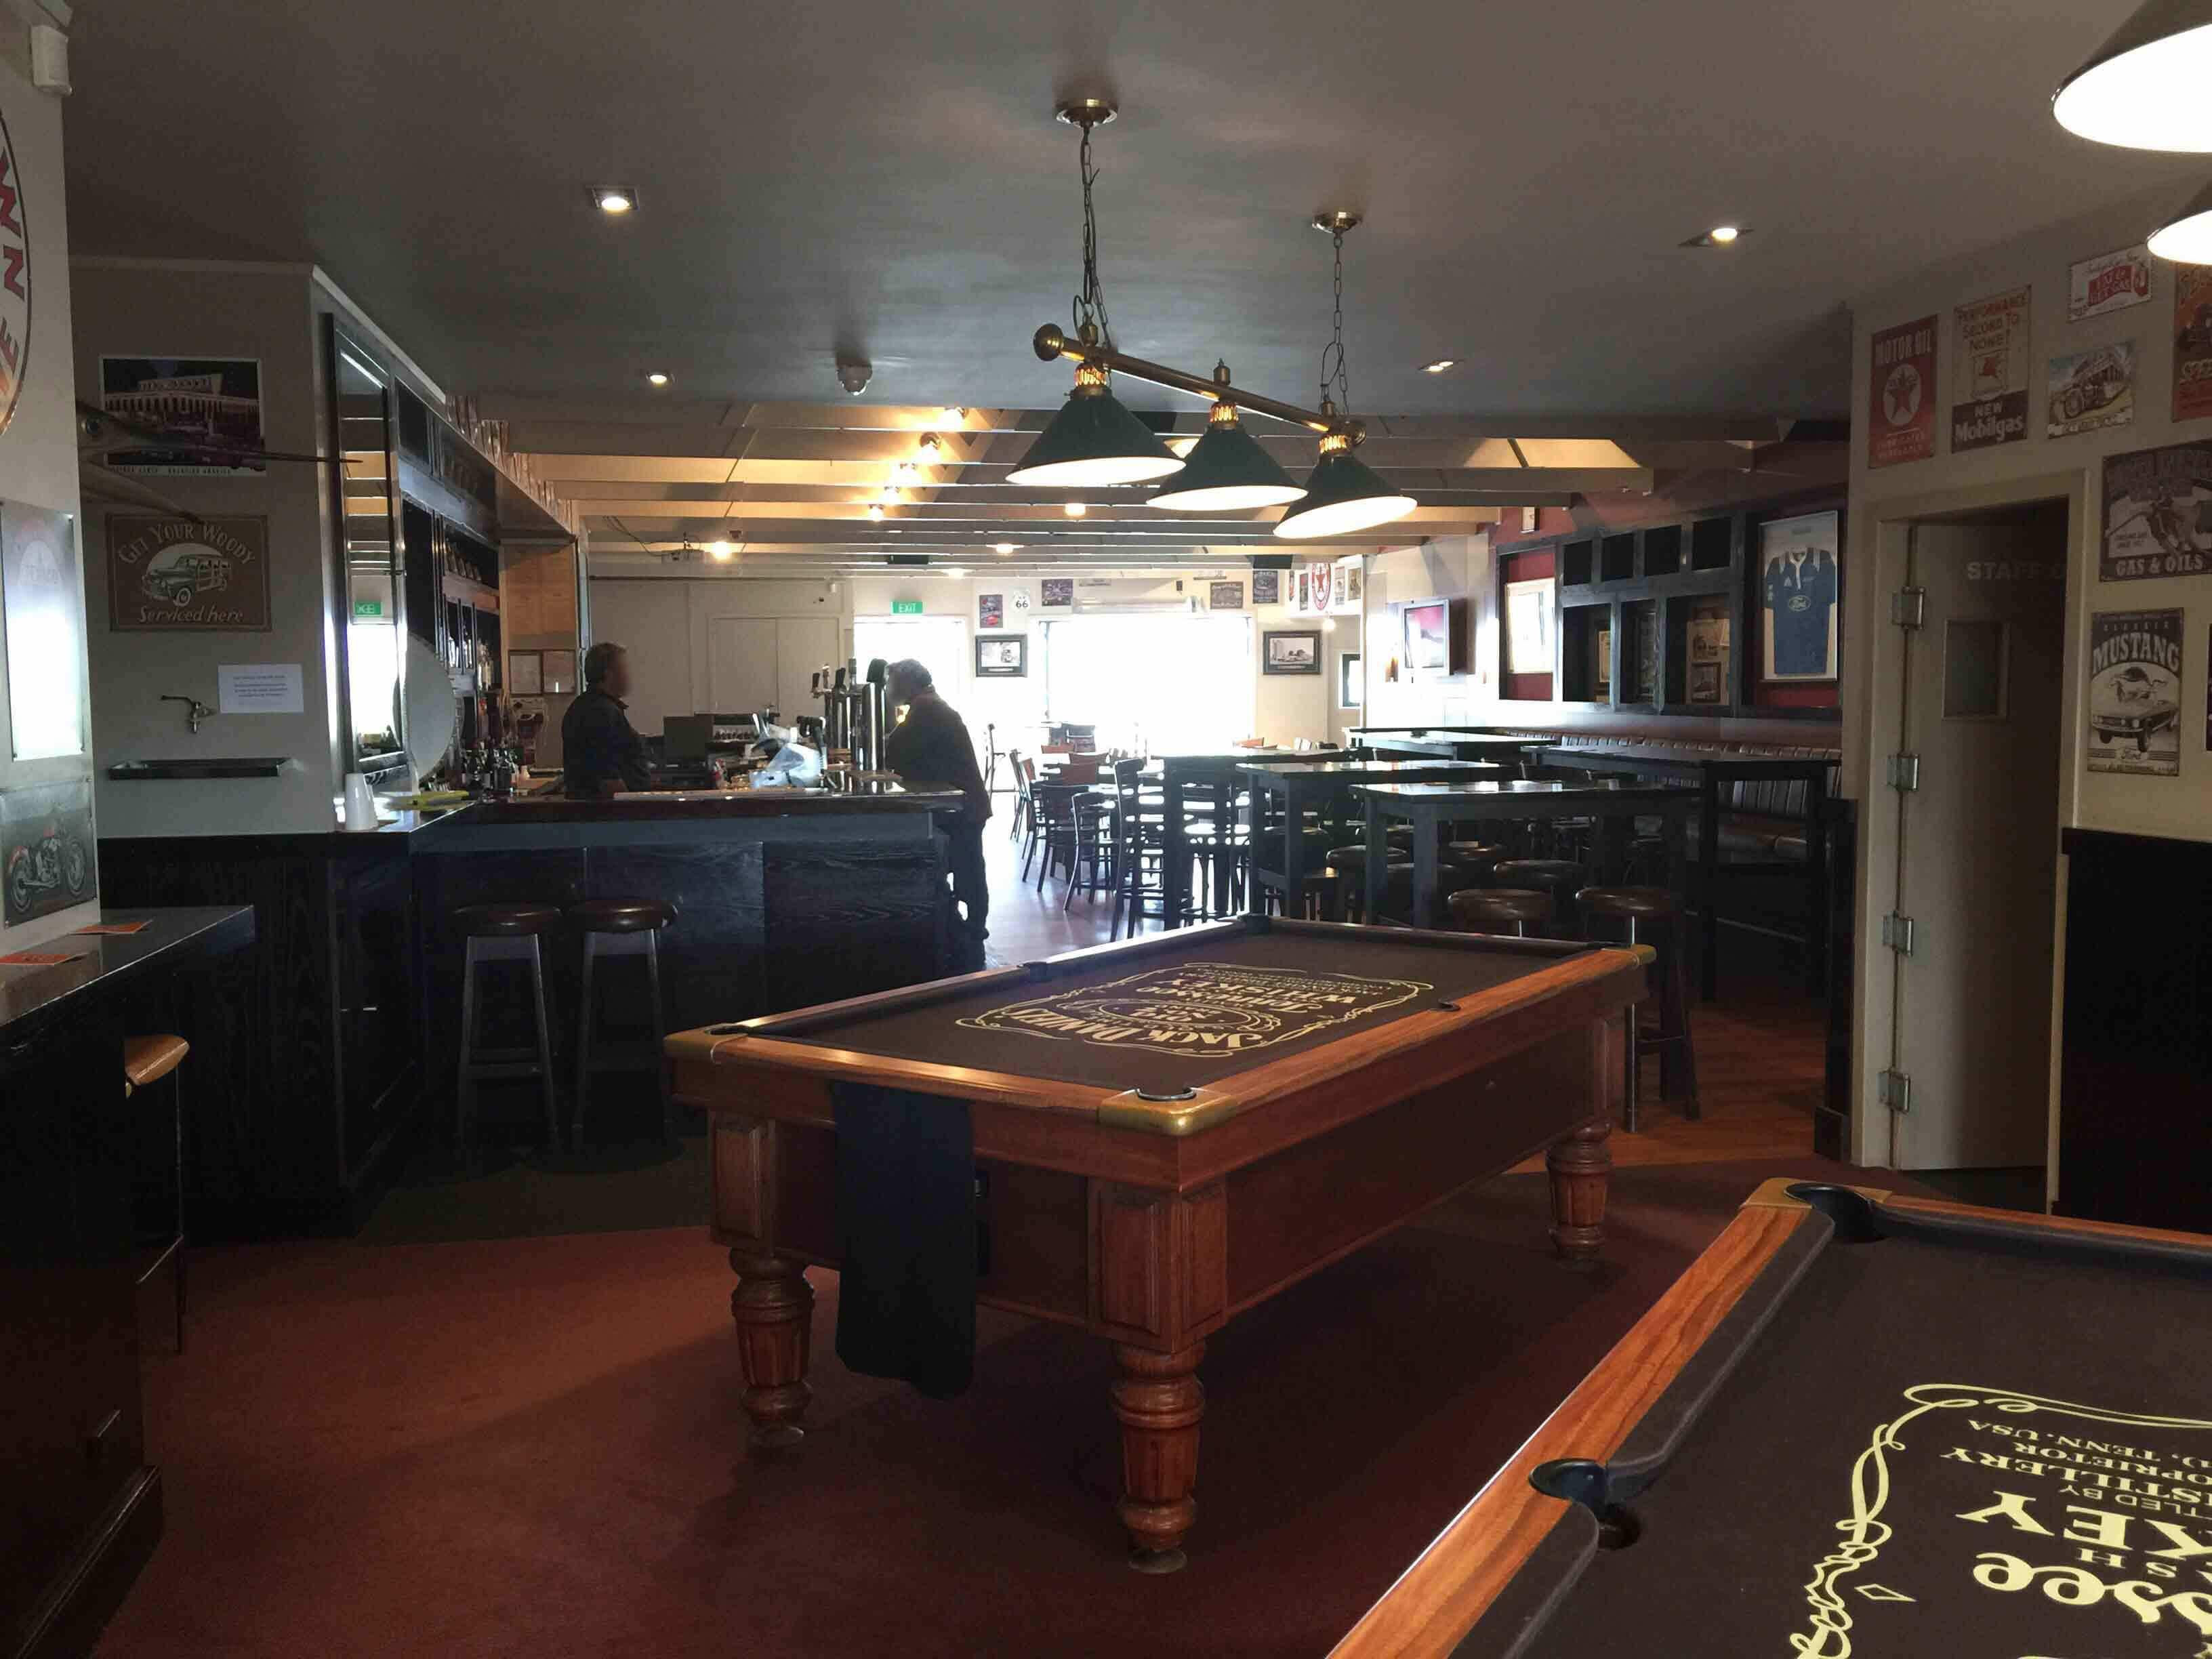 40 HQ Images Sports Bar Near Me With Pool Table - Bar Games 50 Great Ideas For Your Next Game ...